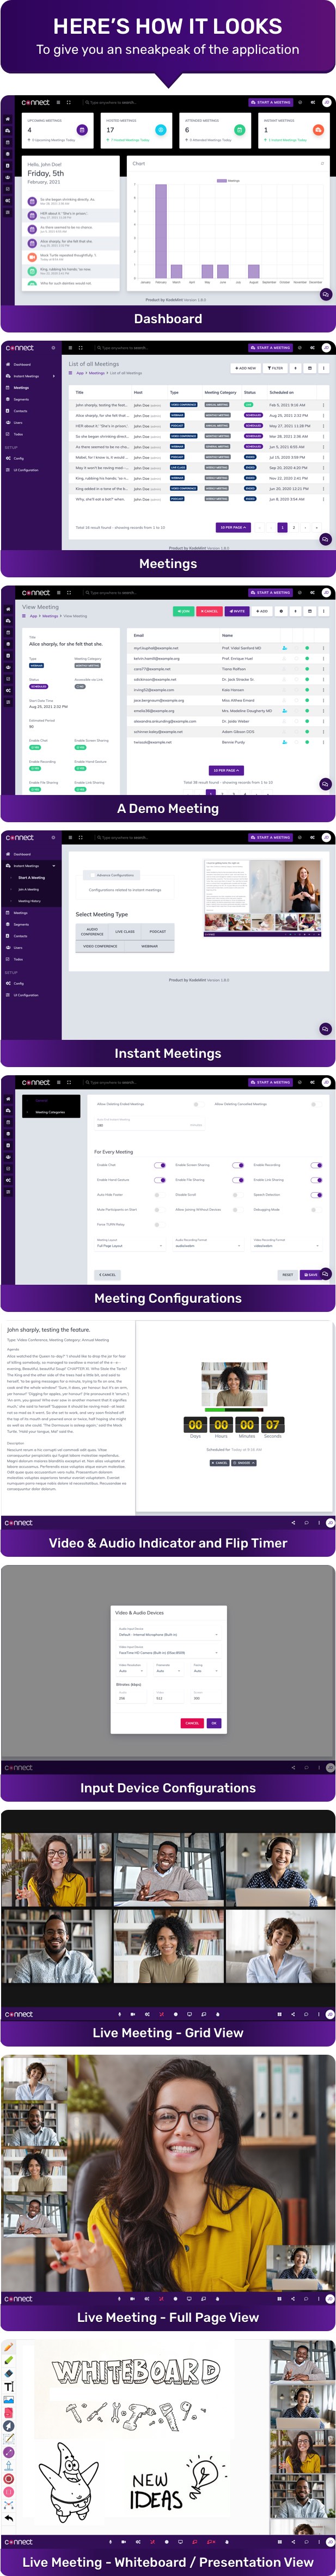 Connect - How UI looks - Video Conference, Webinar, Live Class, Audio Conference, Podcast